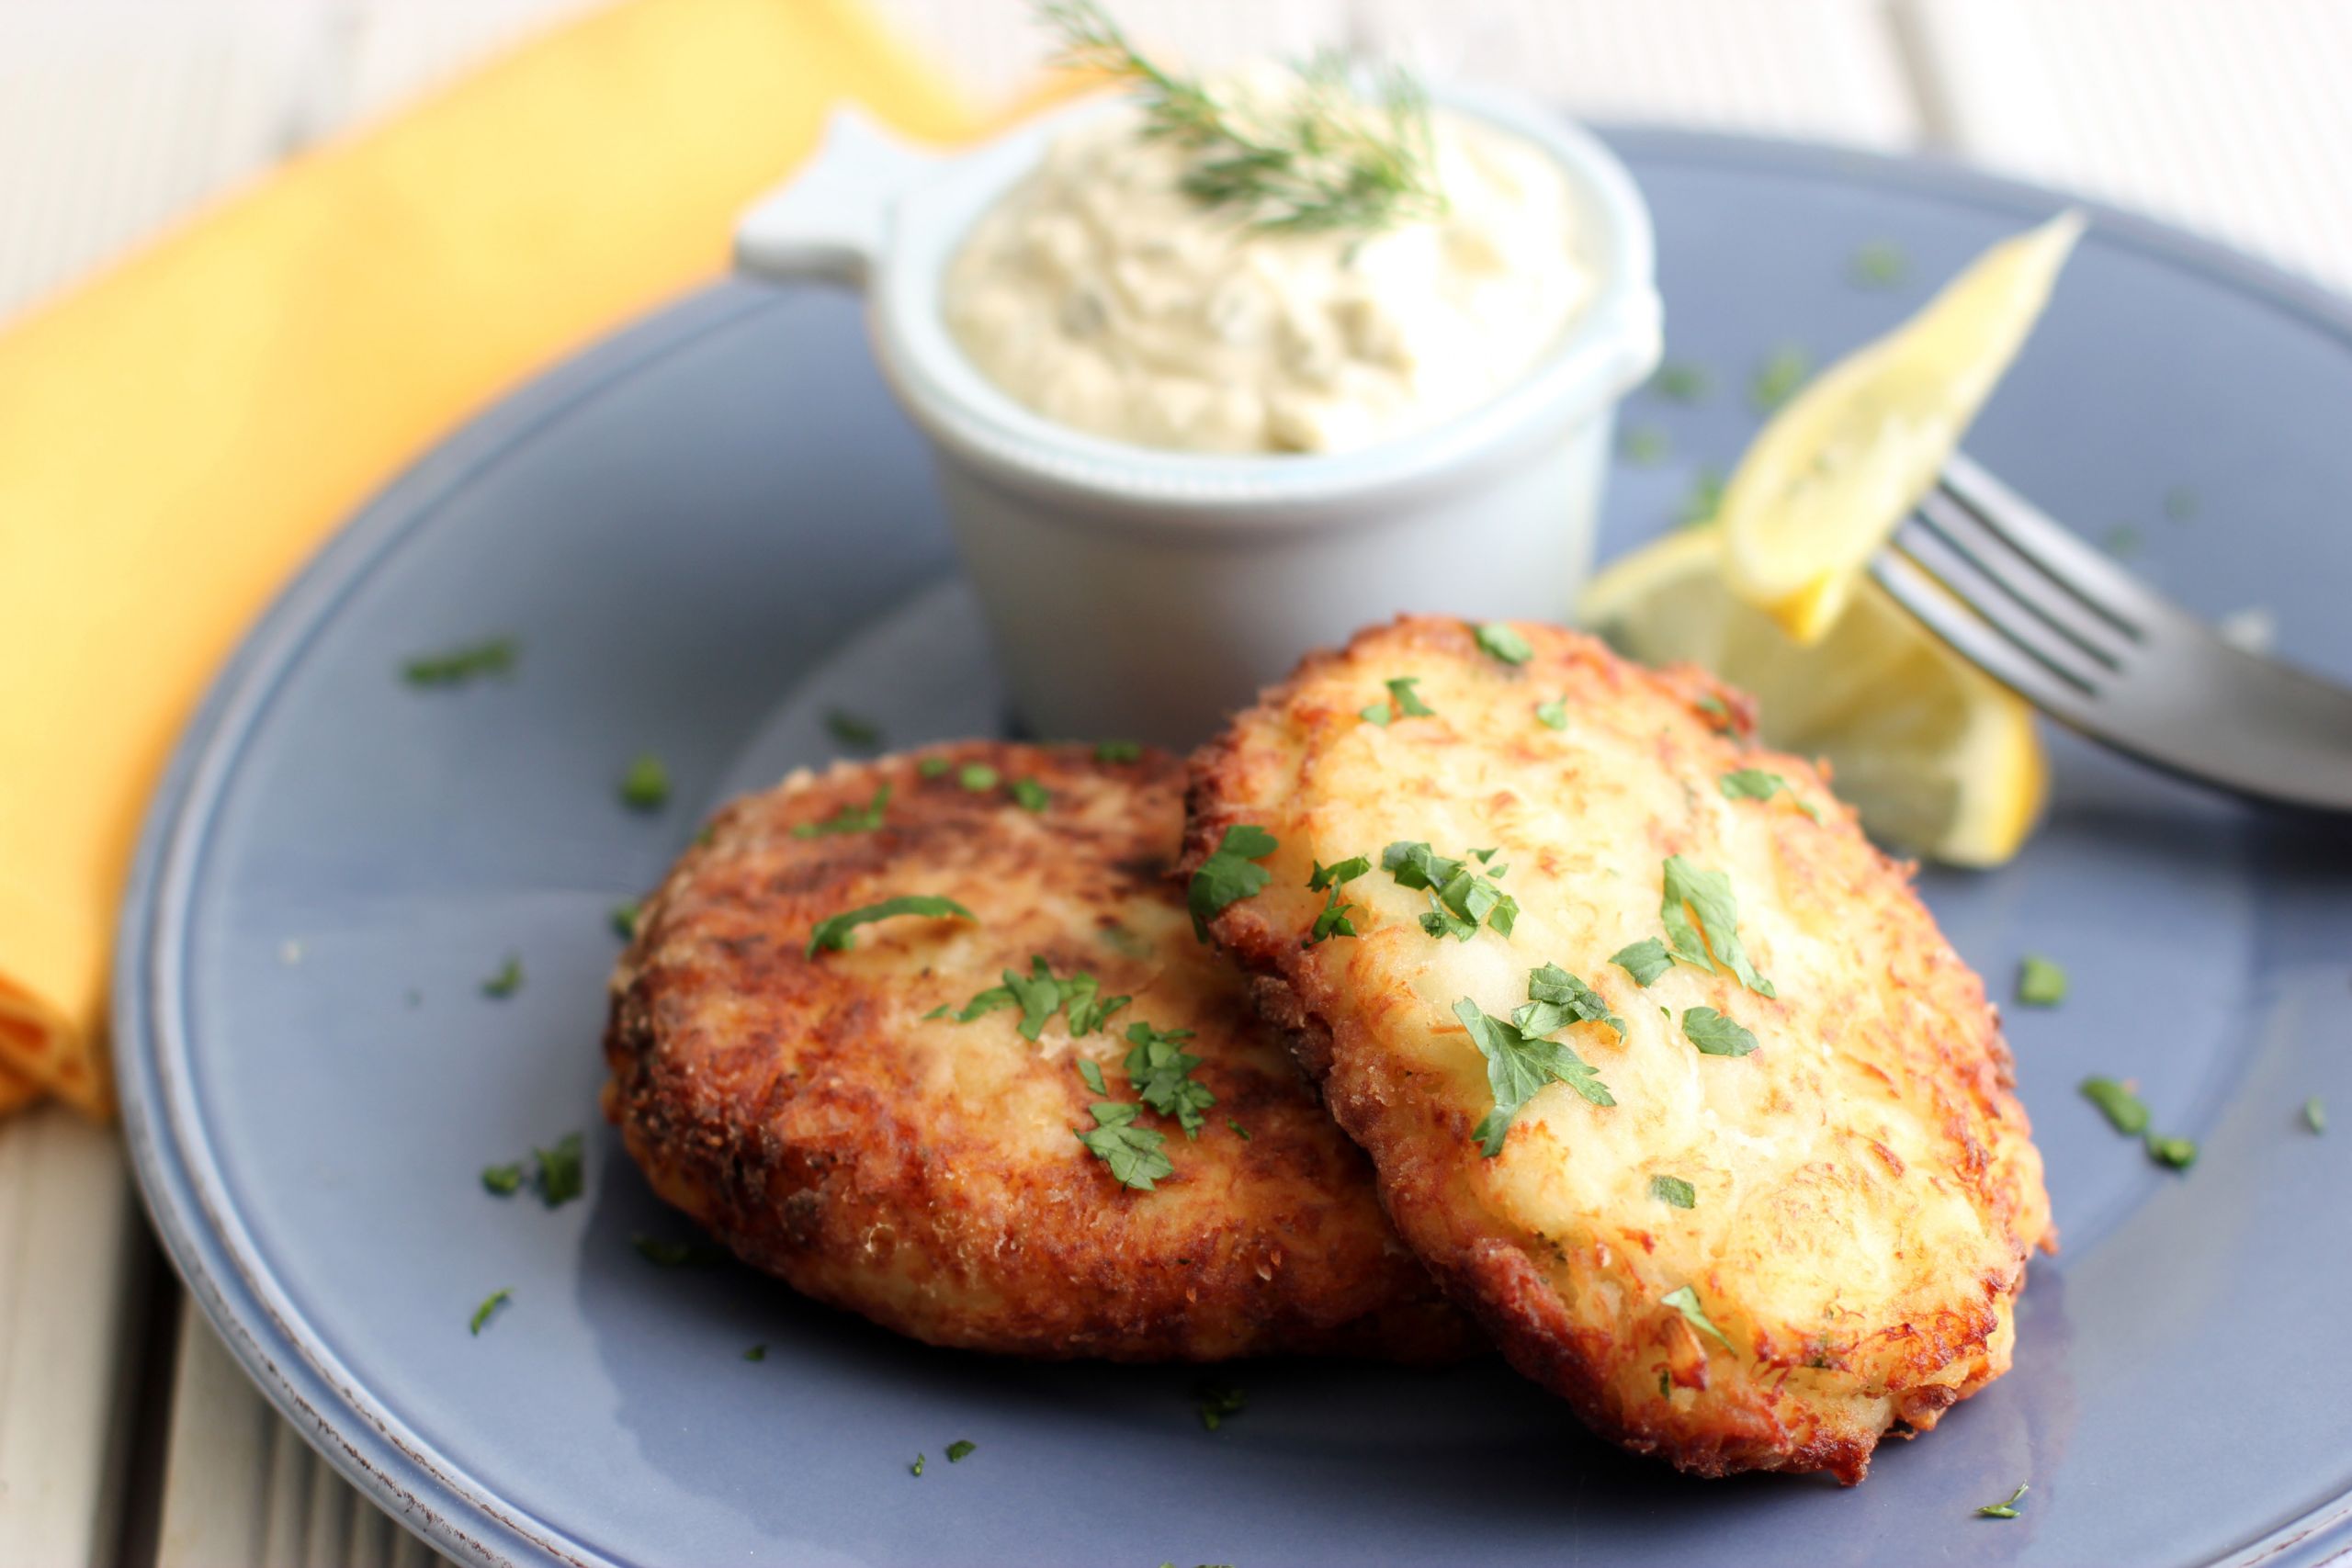 Recipes For Fish Cakes
 The Perfect Fish Cake with Homemade Tartar Sauce